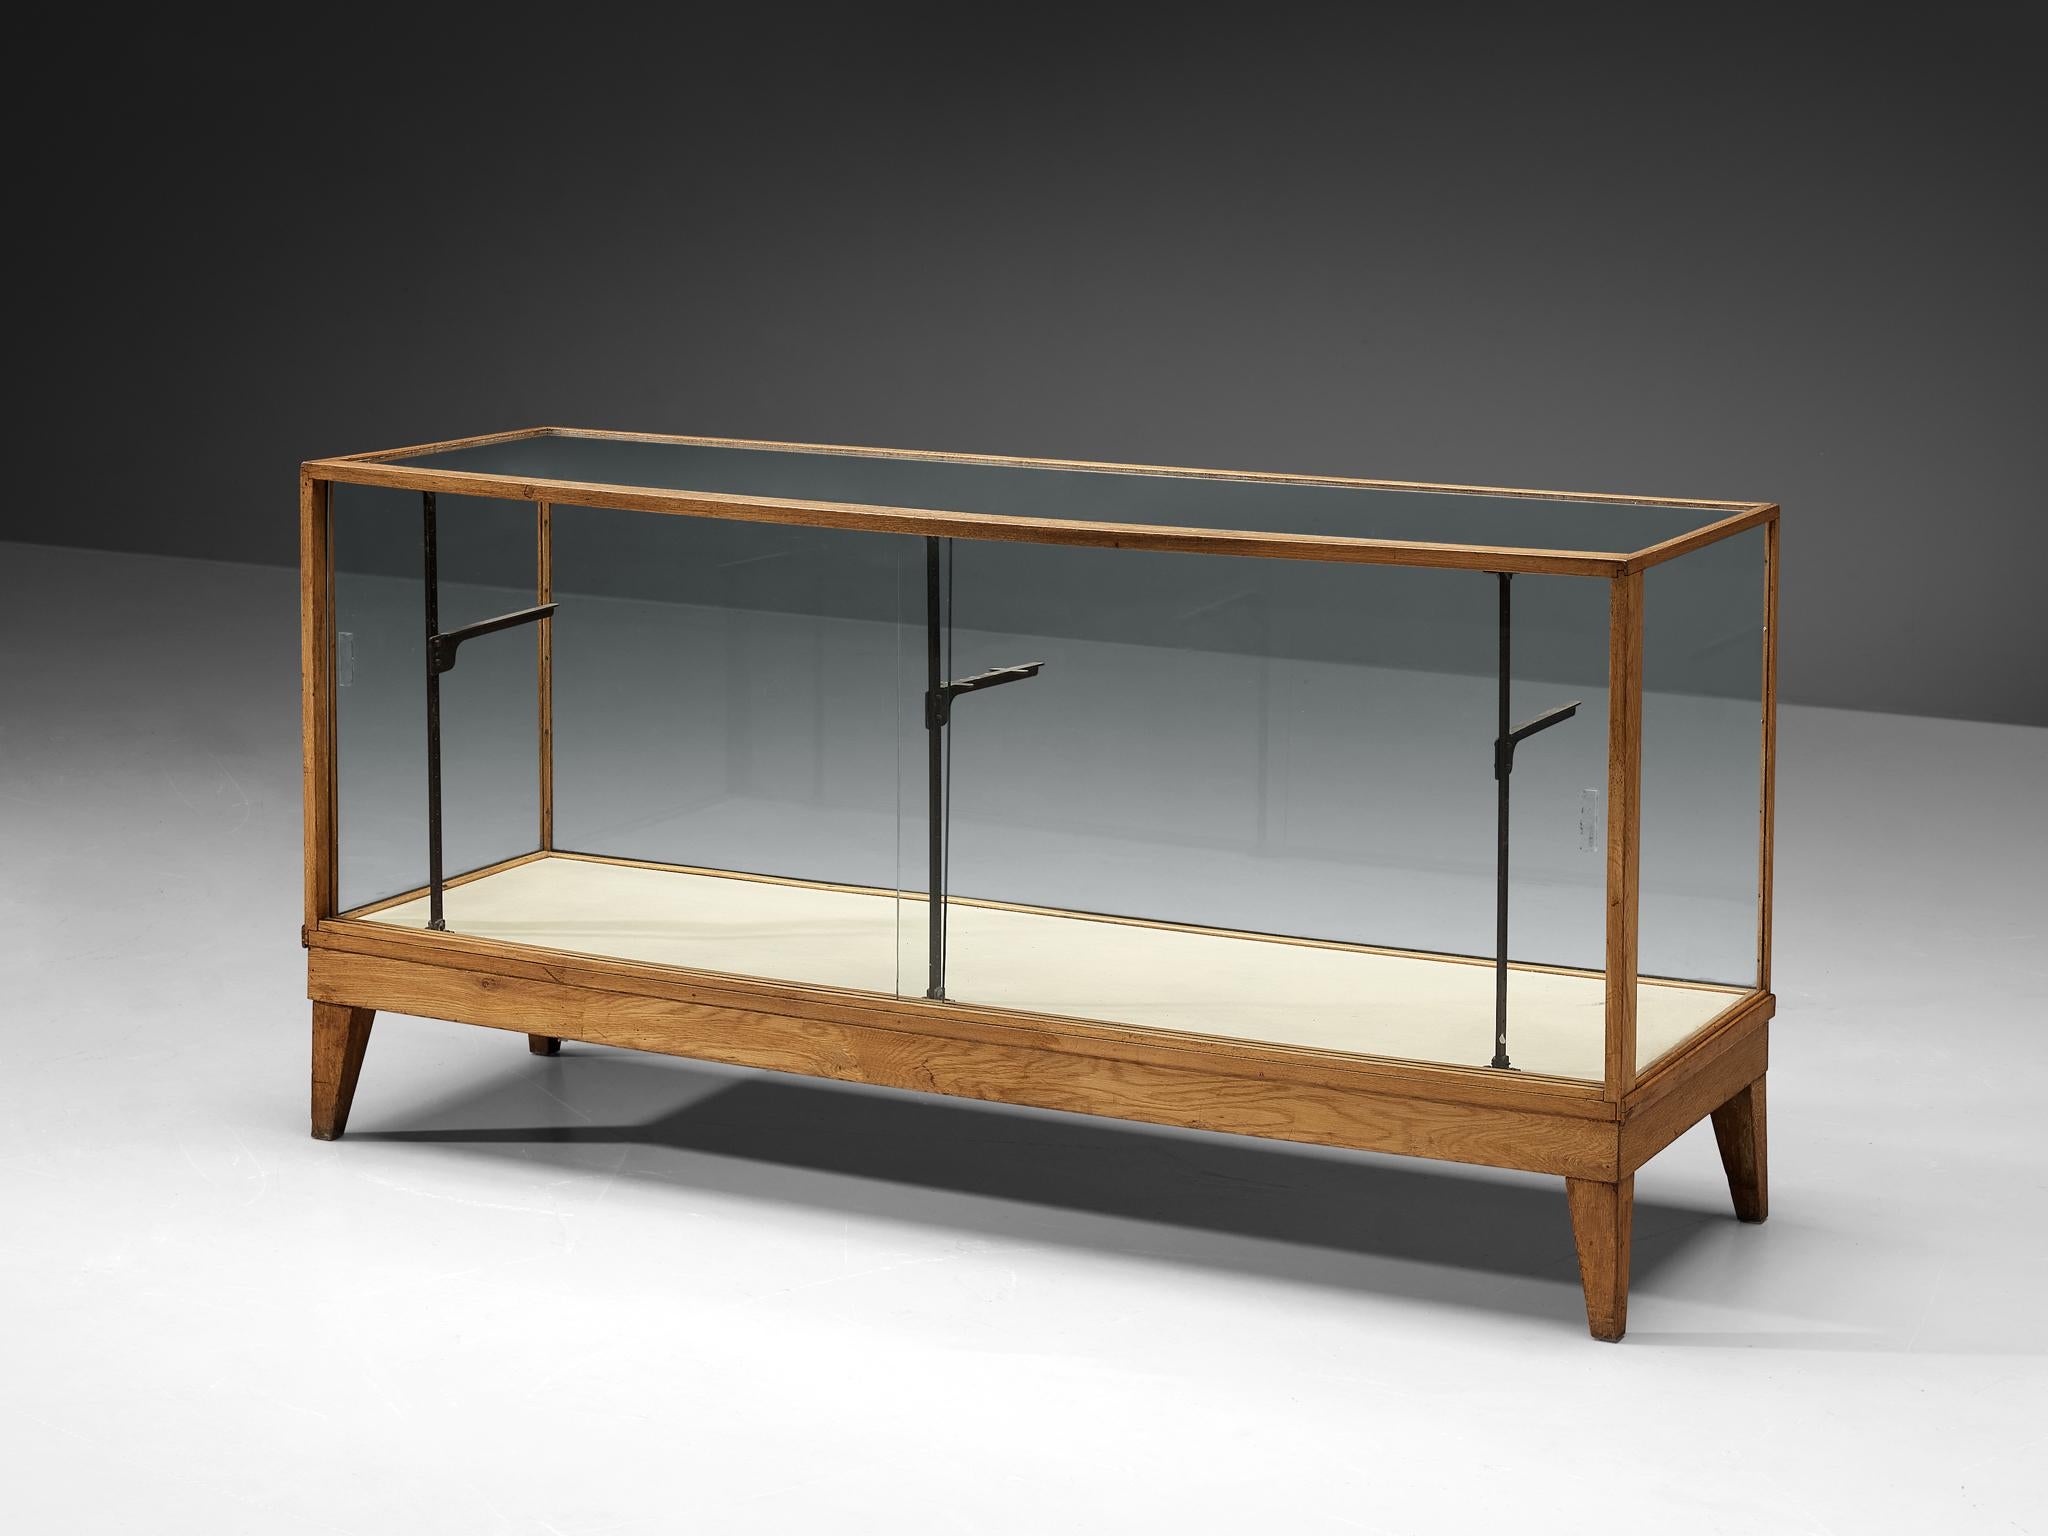 Showcase, oak, glass, brass, Denmark, 1950s. 

Danish showcase with large glass windows and top. Through sliding doors on one side of the showcase, the interior is accessed. Originally the showcase features one glass shelf that can be done upon